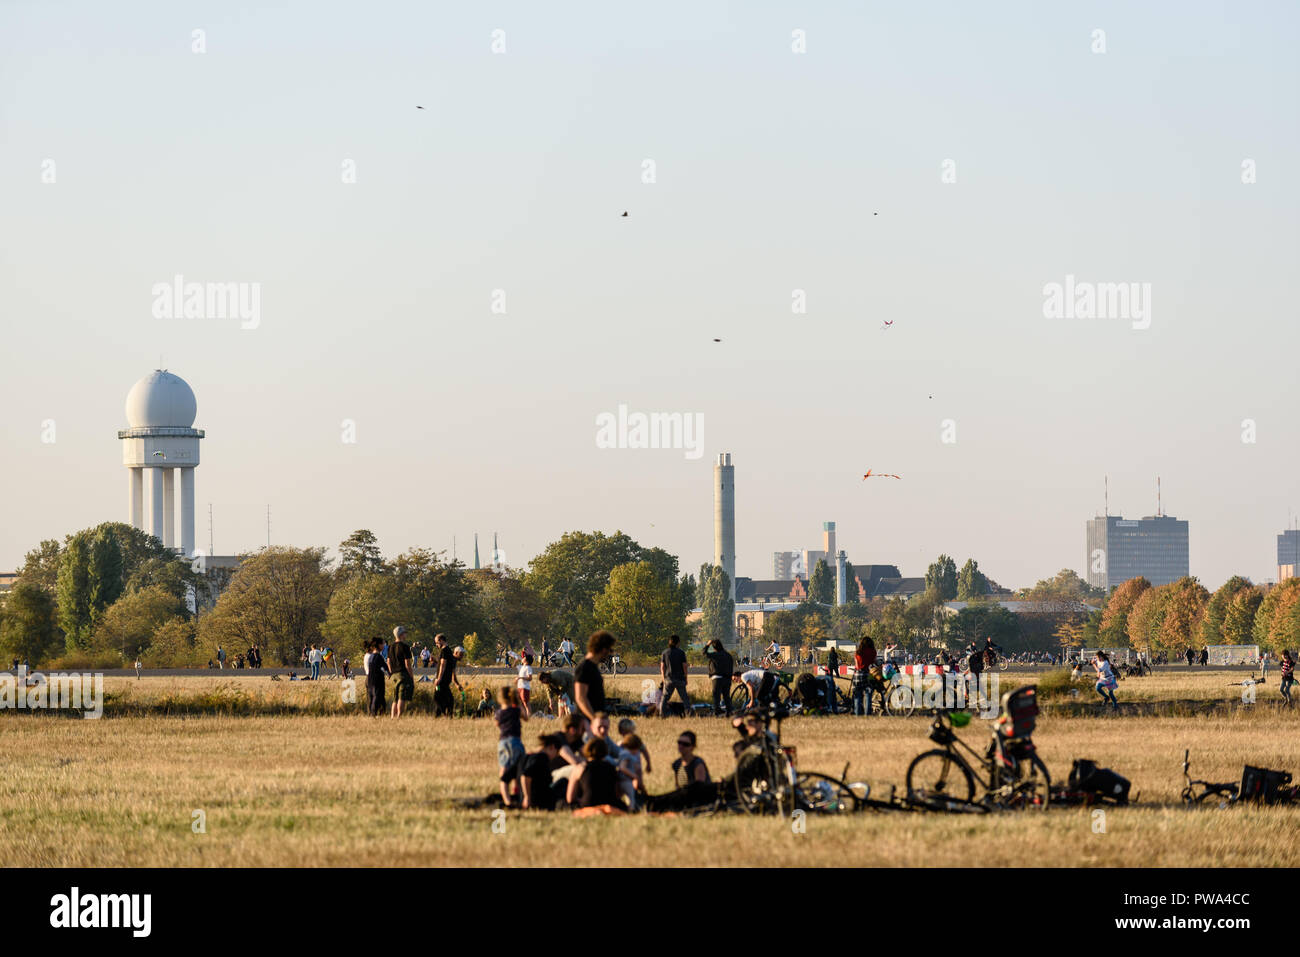 Visitors are seen on the Tempelhor field. The good weather in October brings many visitors to the park at the former Tempelhof Airport. Stock Photo